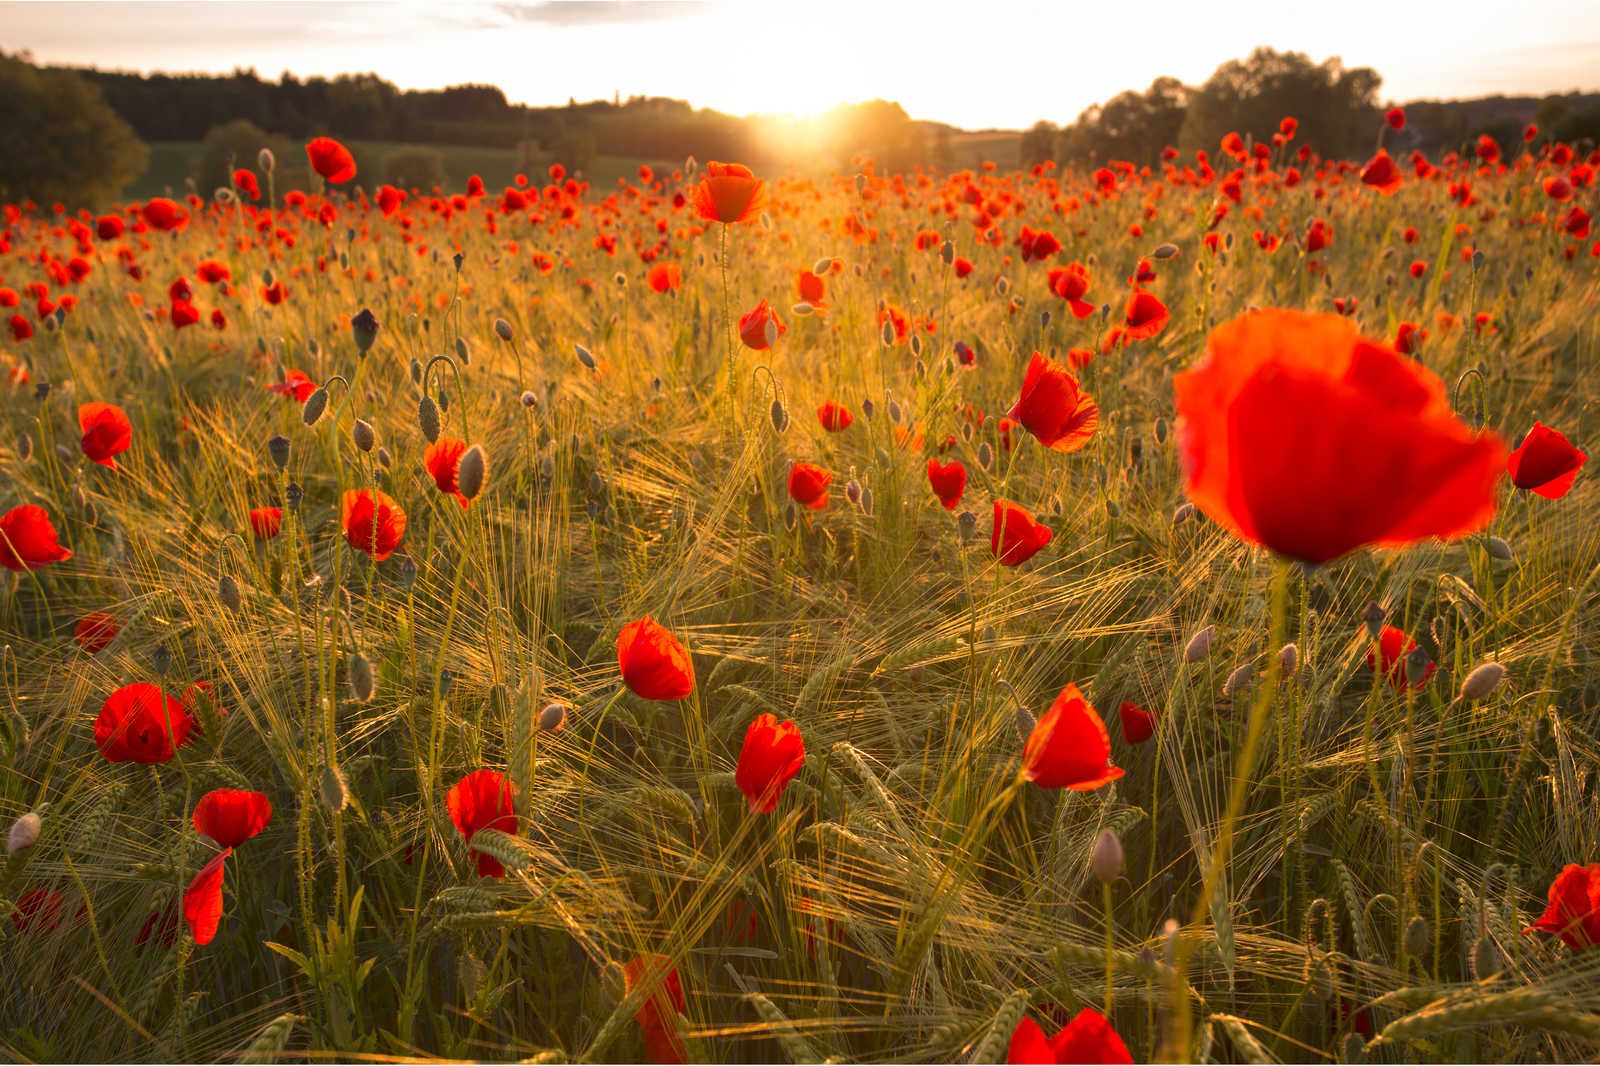             Poppy Meadow Canvas Painting at Sunrise - 1.20 m x 0.80 m
        